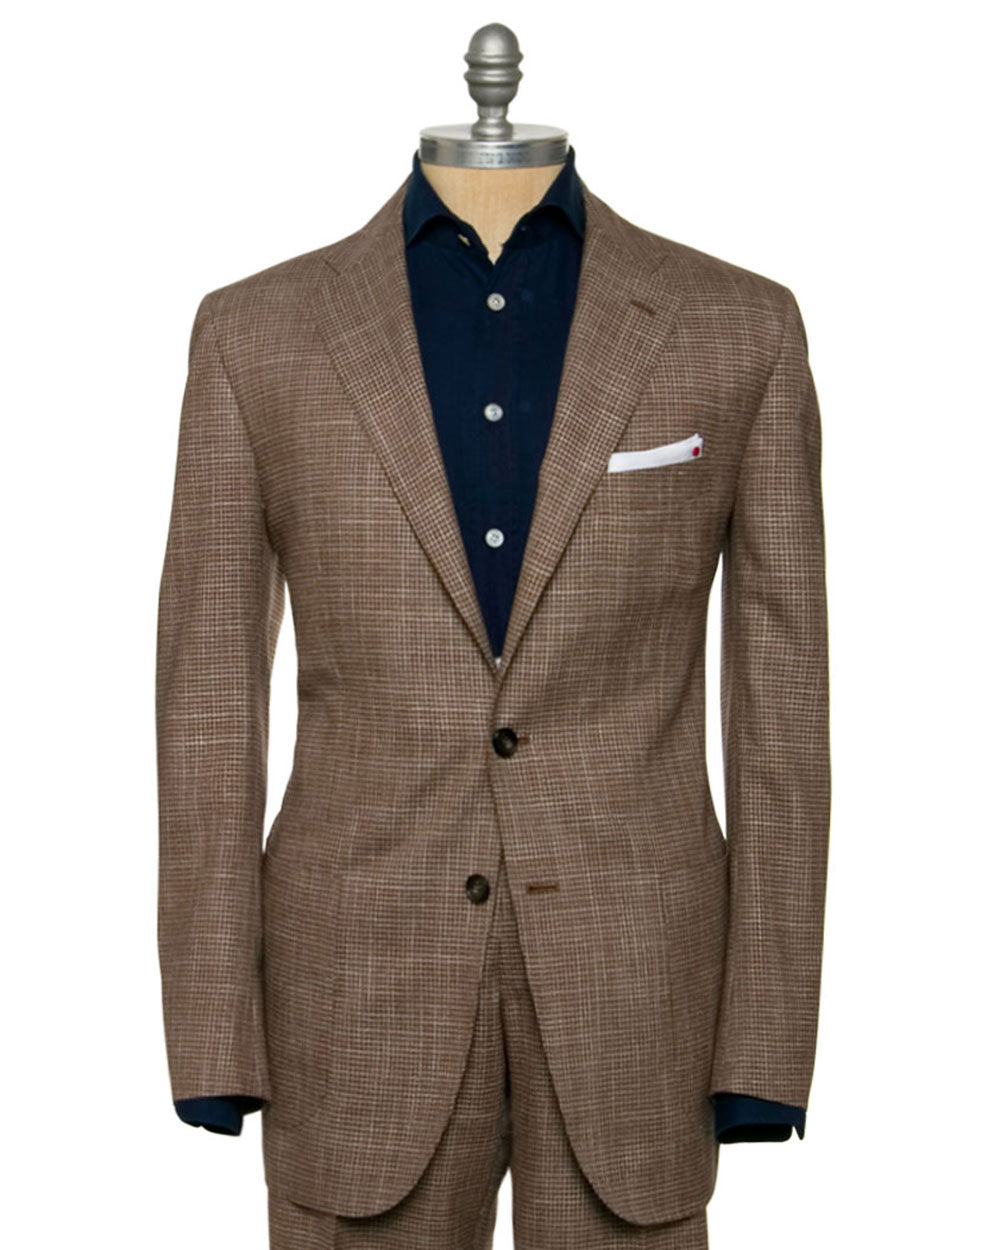 Moro Cashmere Wool Suit